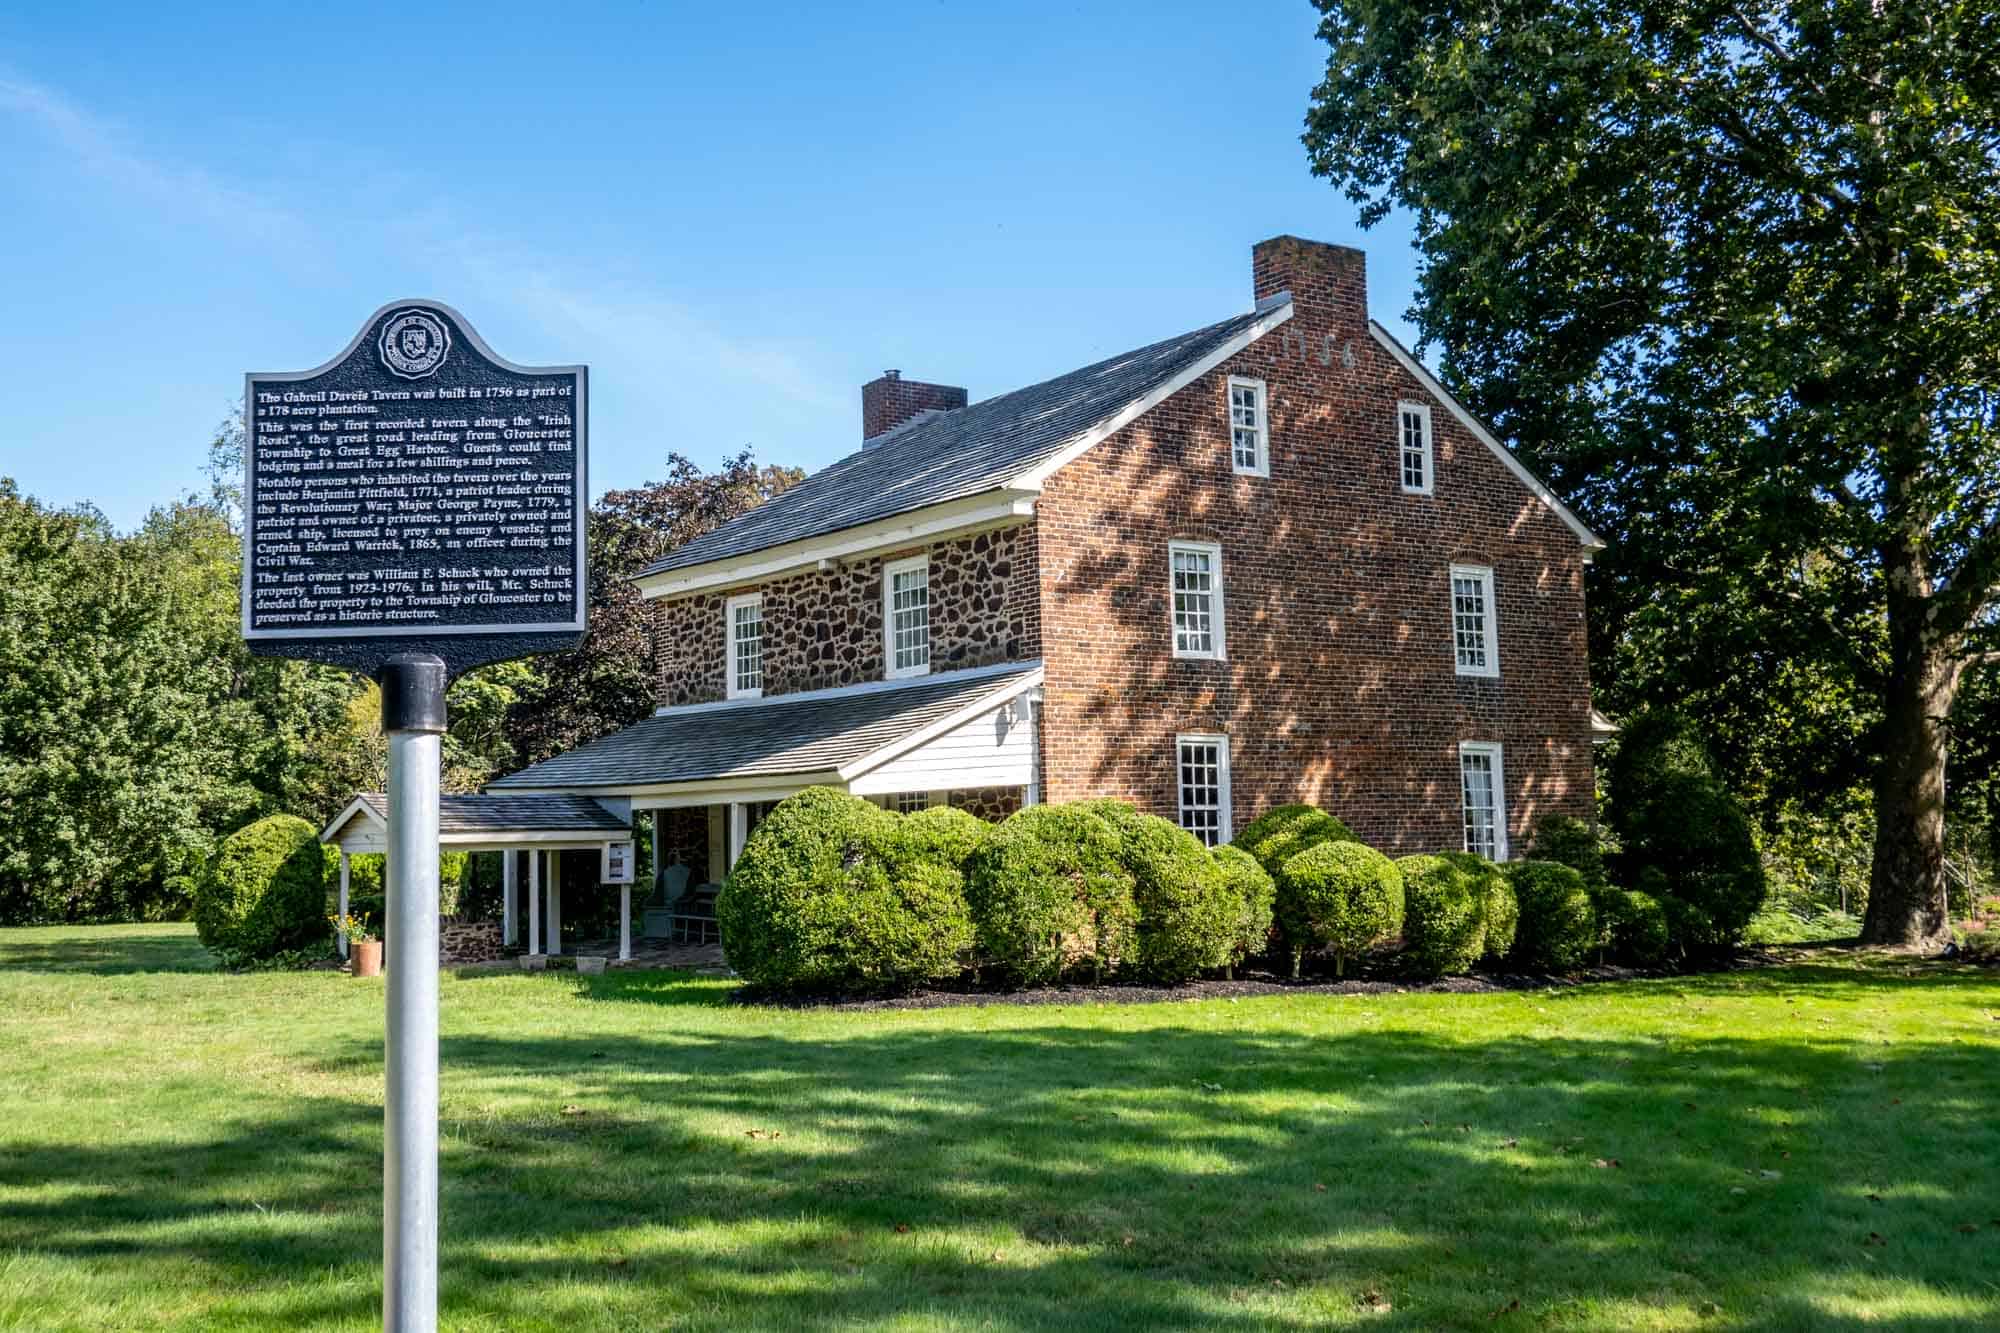 two-story brick and stone building with a porch beside an historical marker sign